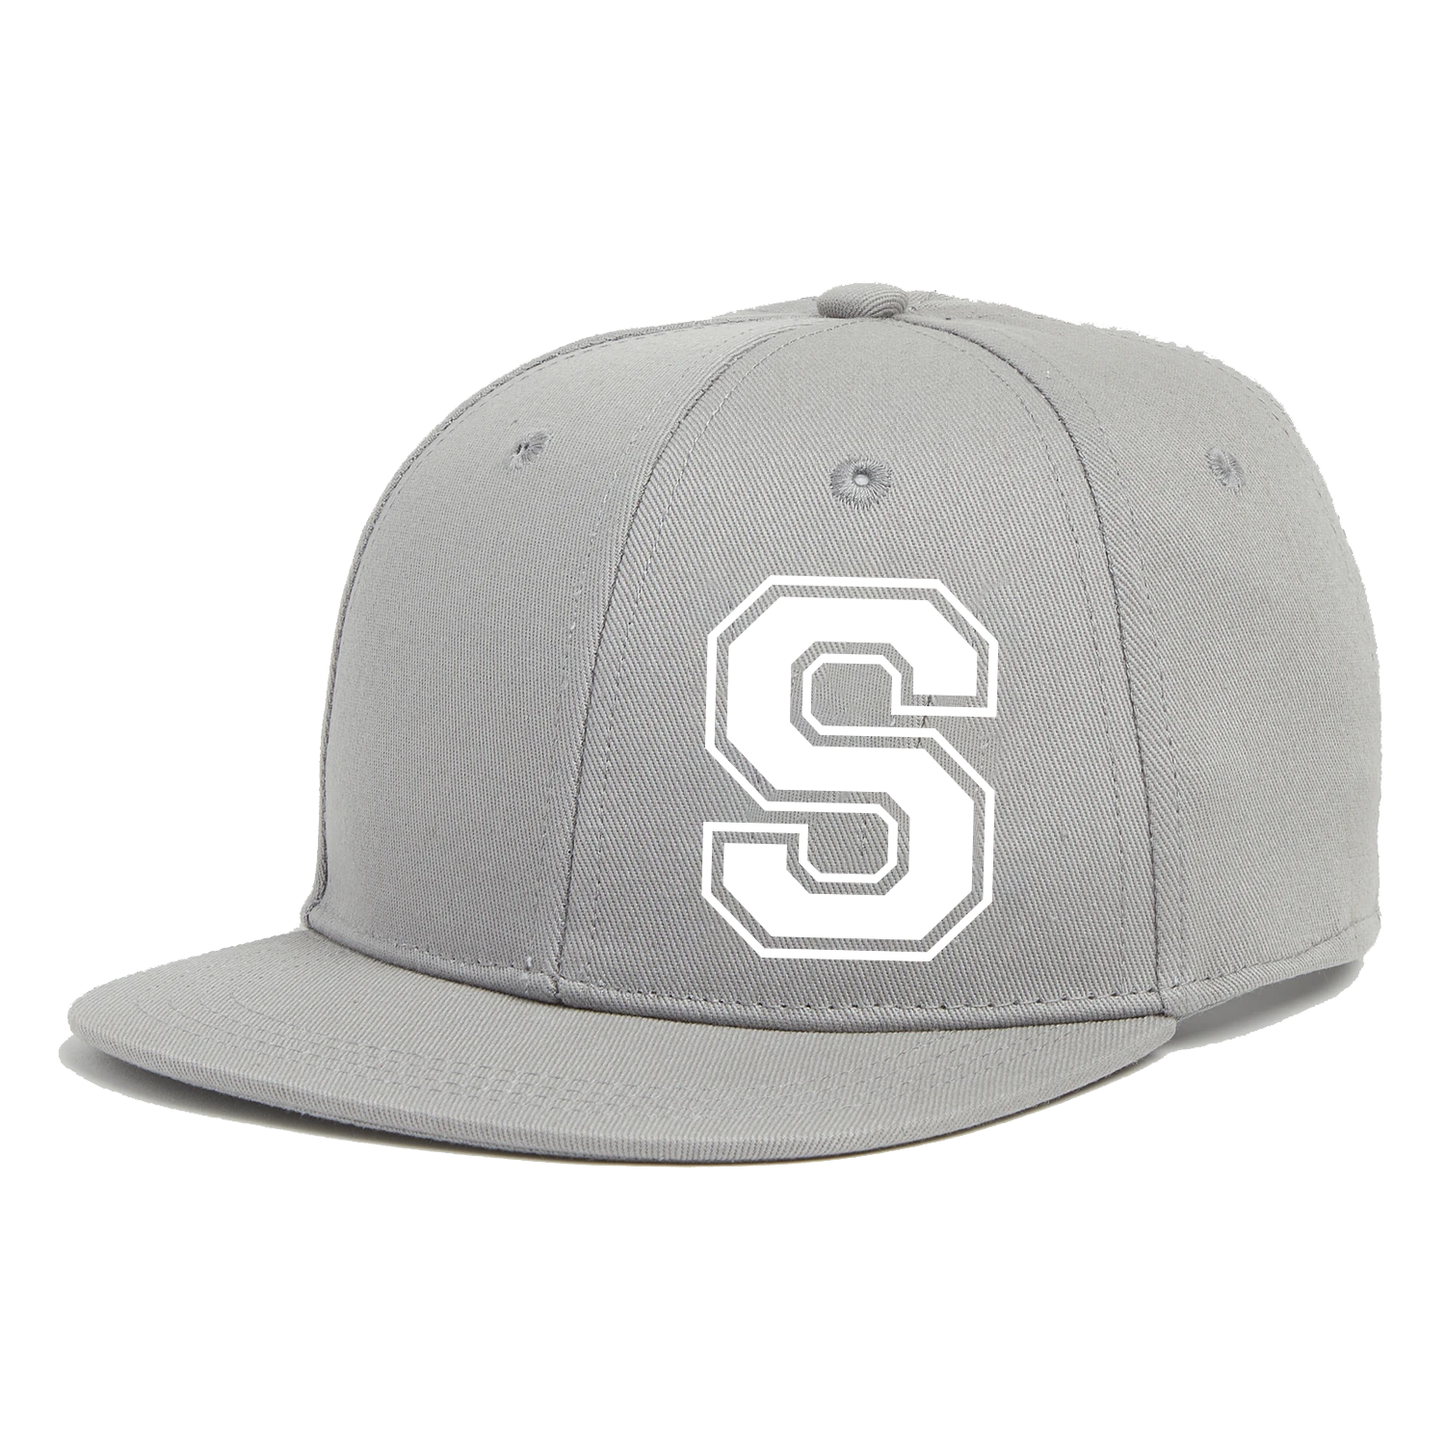 Personalised Grey Varsity Letter Snap Back Cap - 3 different size options